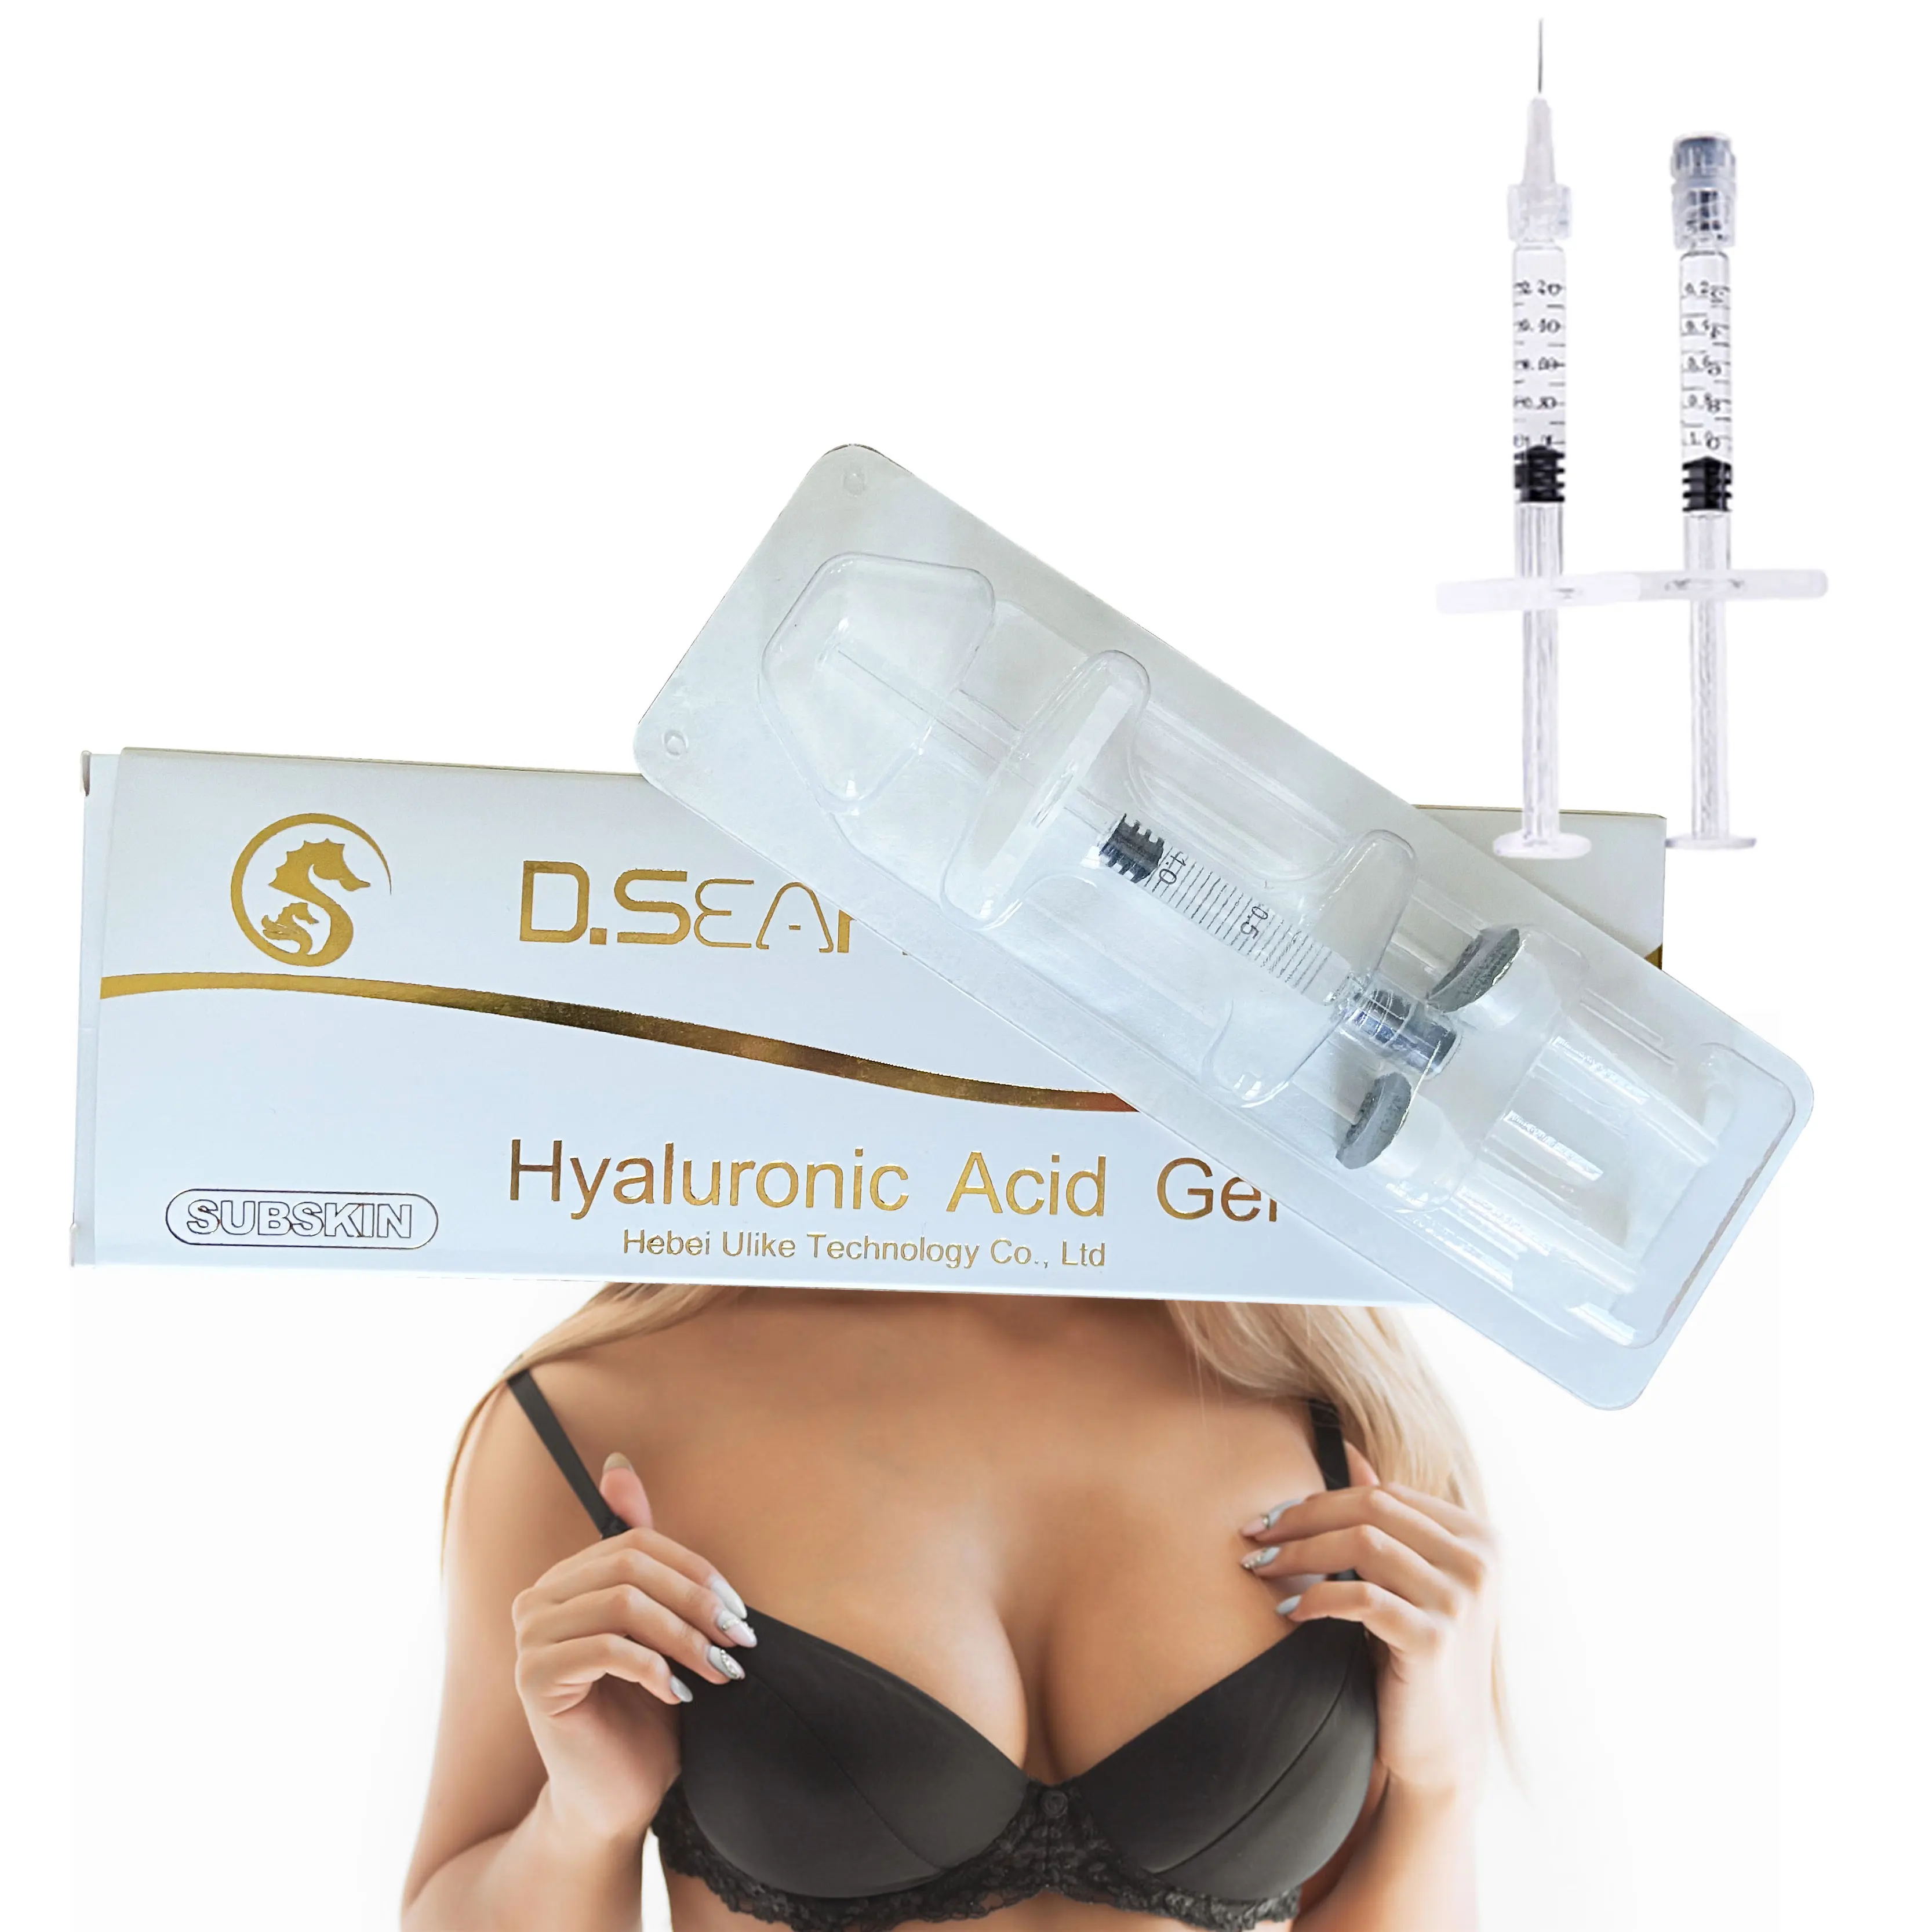 

wholesale best price hyaluronic acid injections to buy/dermal filler 10ml for injection increase breast size buttocks hips